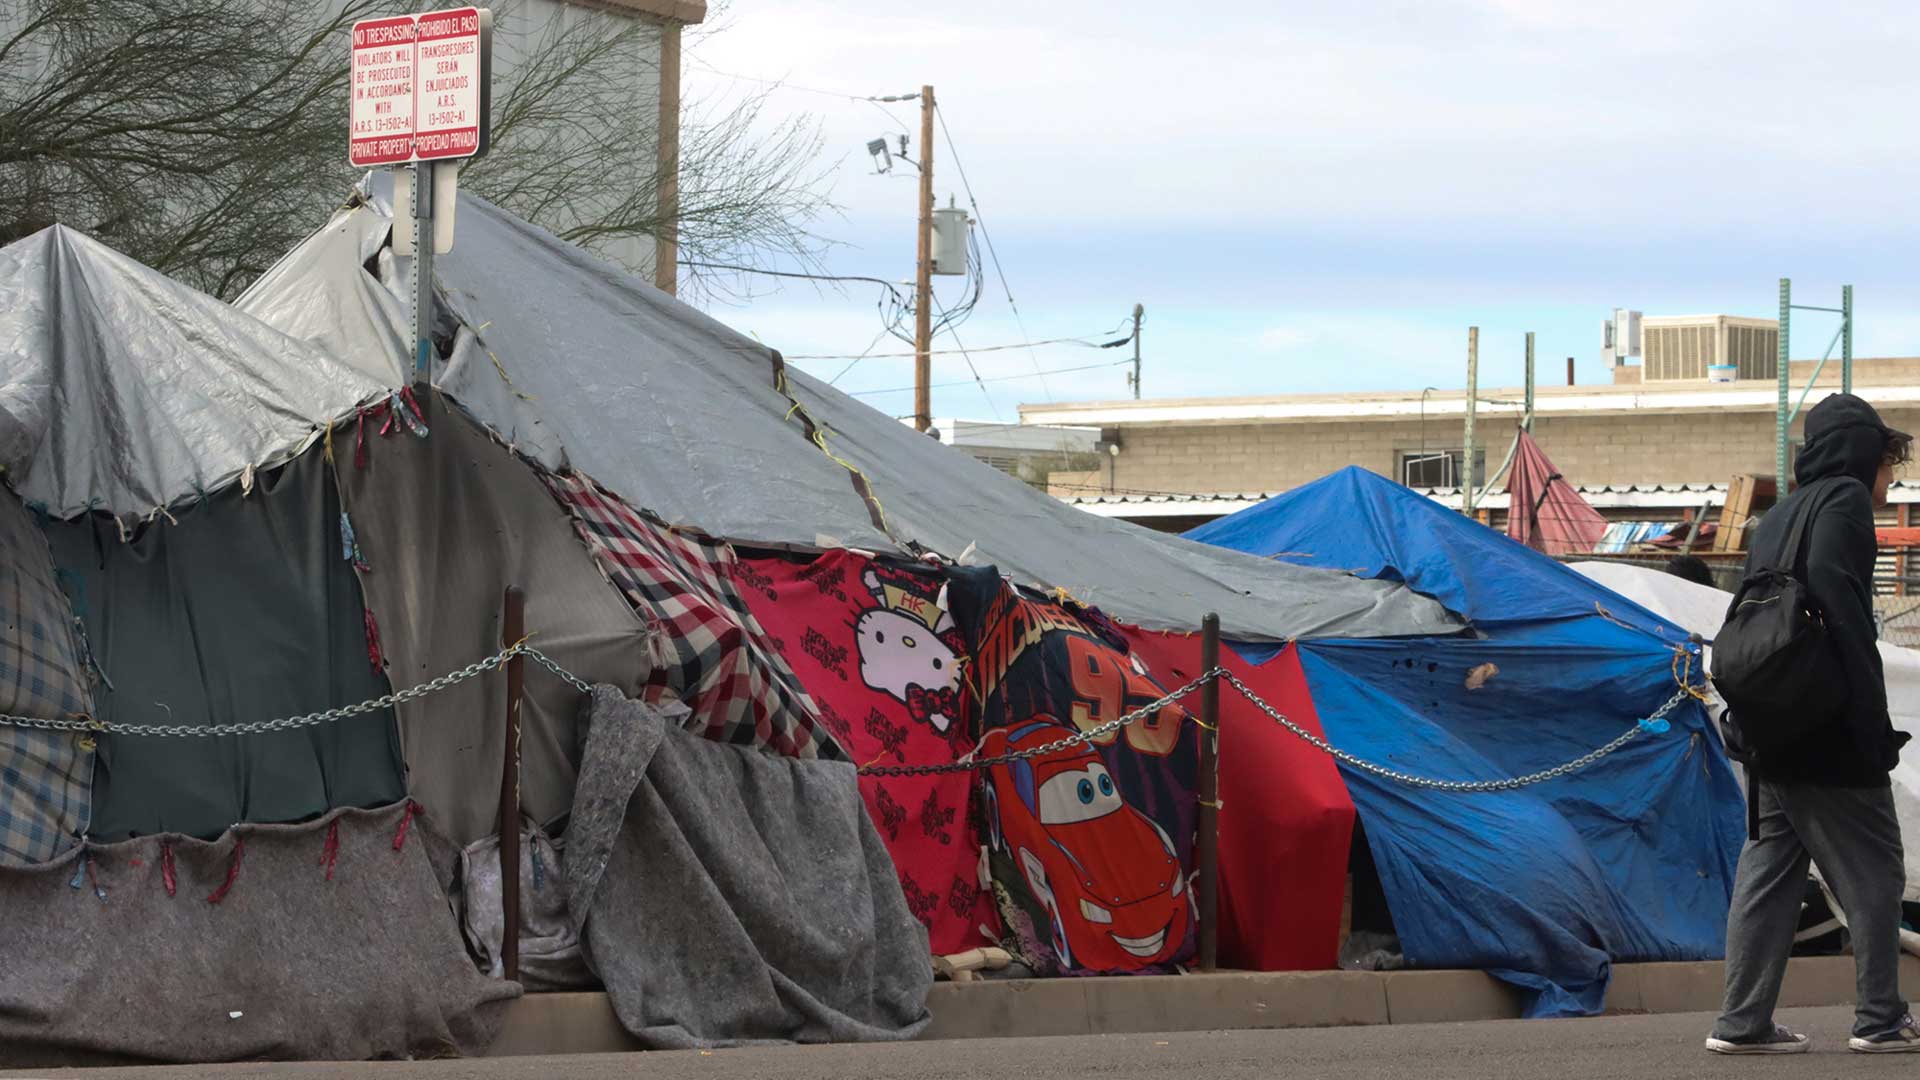 A person walks past tarps, cloths, and tents set up as temporary living spaces on West Madison Street in “The Zone,” the area surrounding the Human Services Campus in Phoenix on March 1, 2023. 